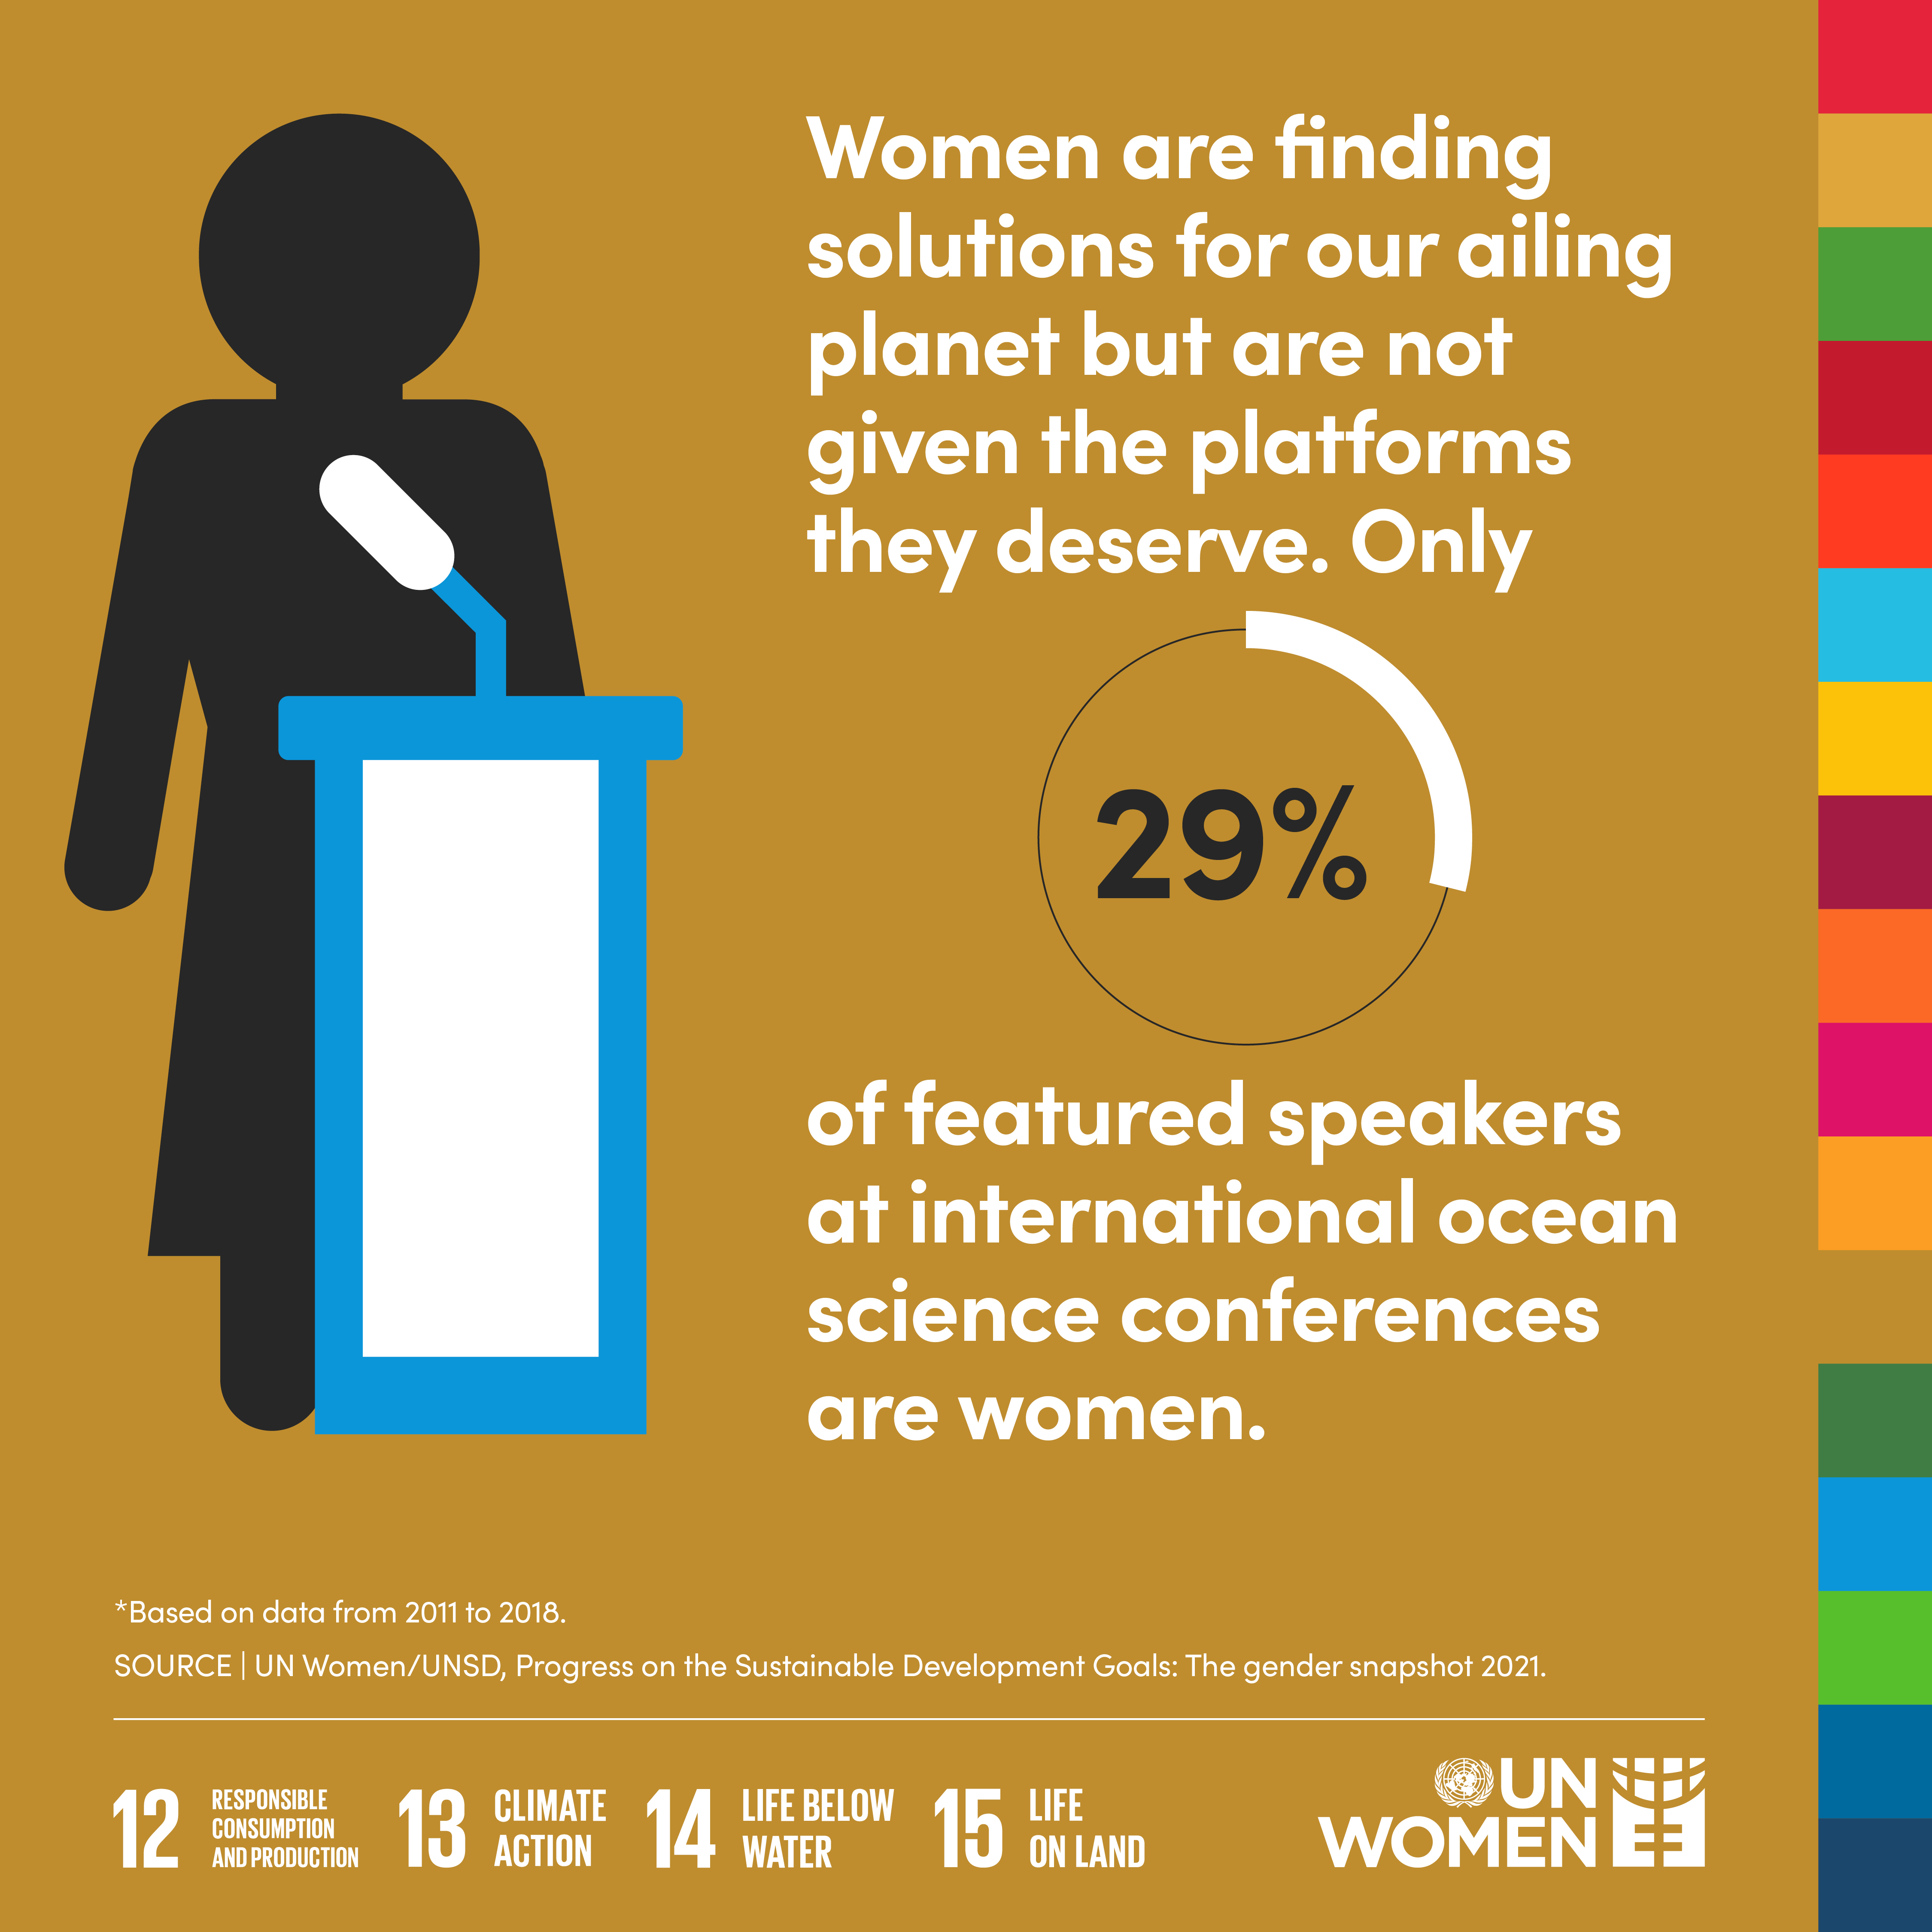 Women are finding solutions for our ailing planet, but are not given the platforms they deserve. Only 29% of featured speakers at international ocean science conferences are women.